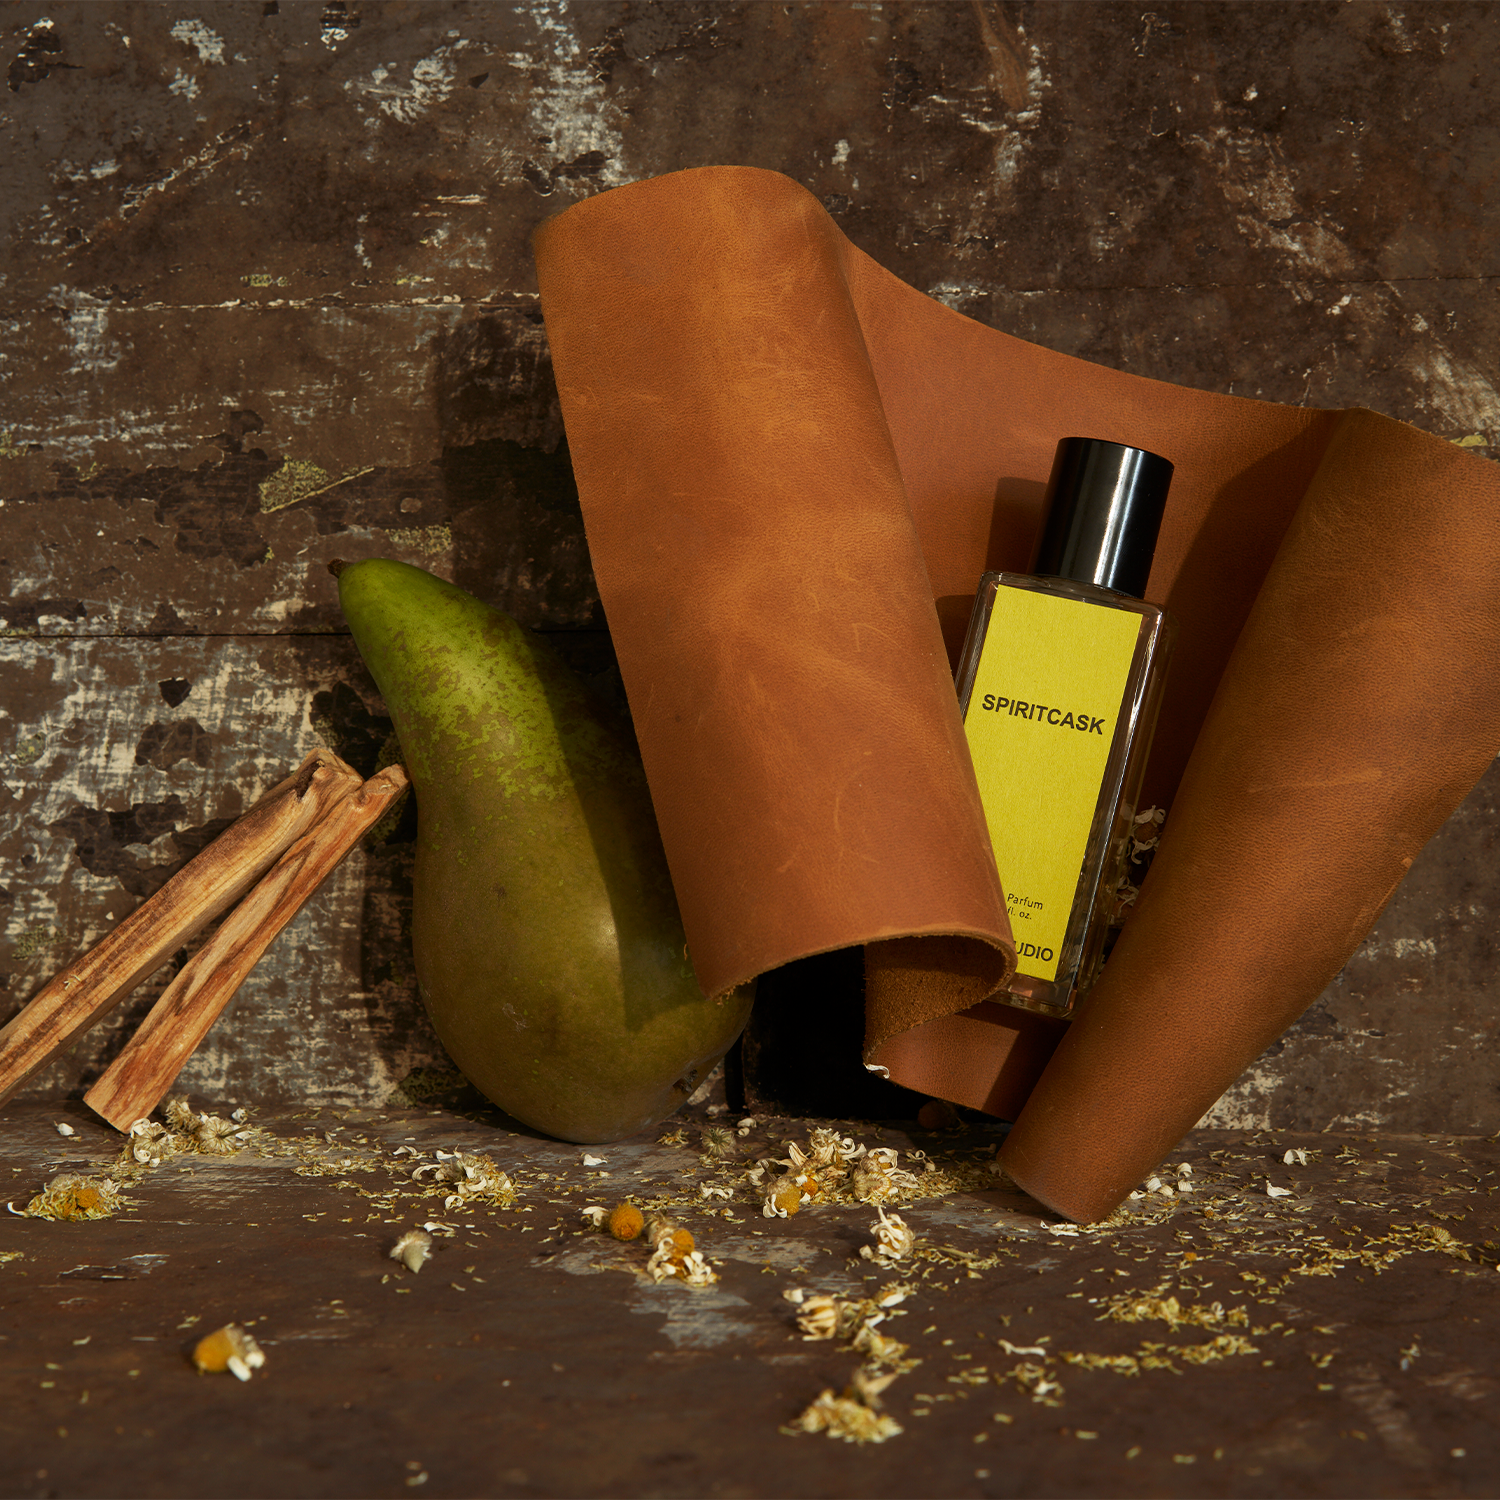 Jorum Studio Spiritcask perfume bottle arranged in a still-life featuring brown leather, a pear, dried chamomile against an aged wooden background